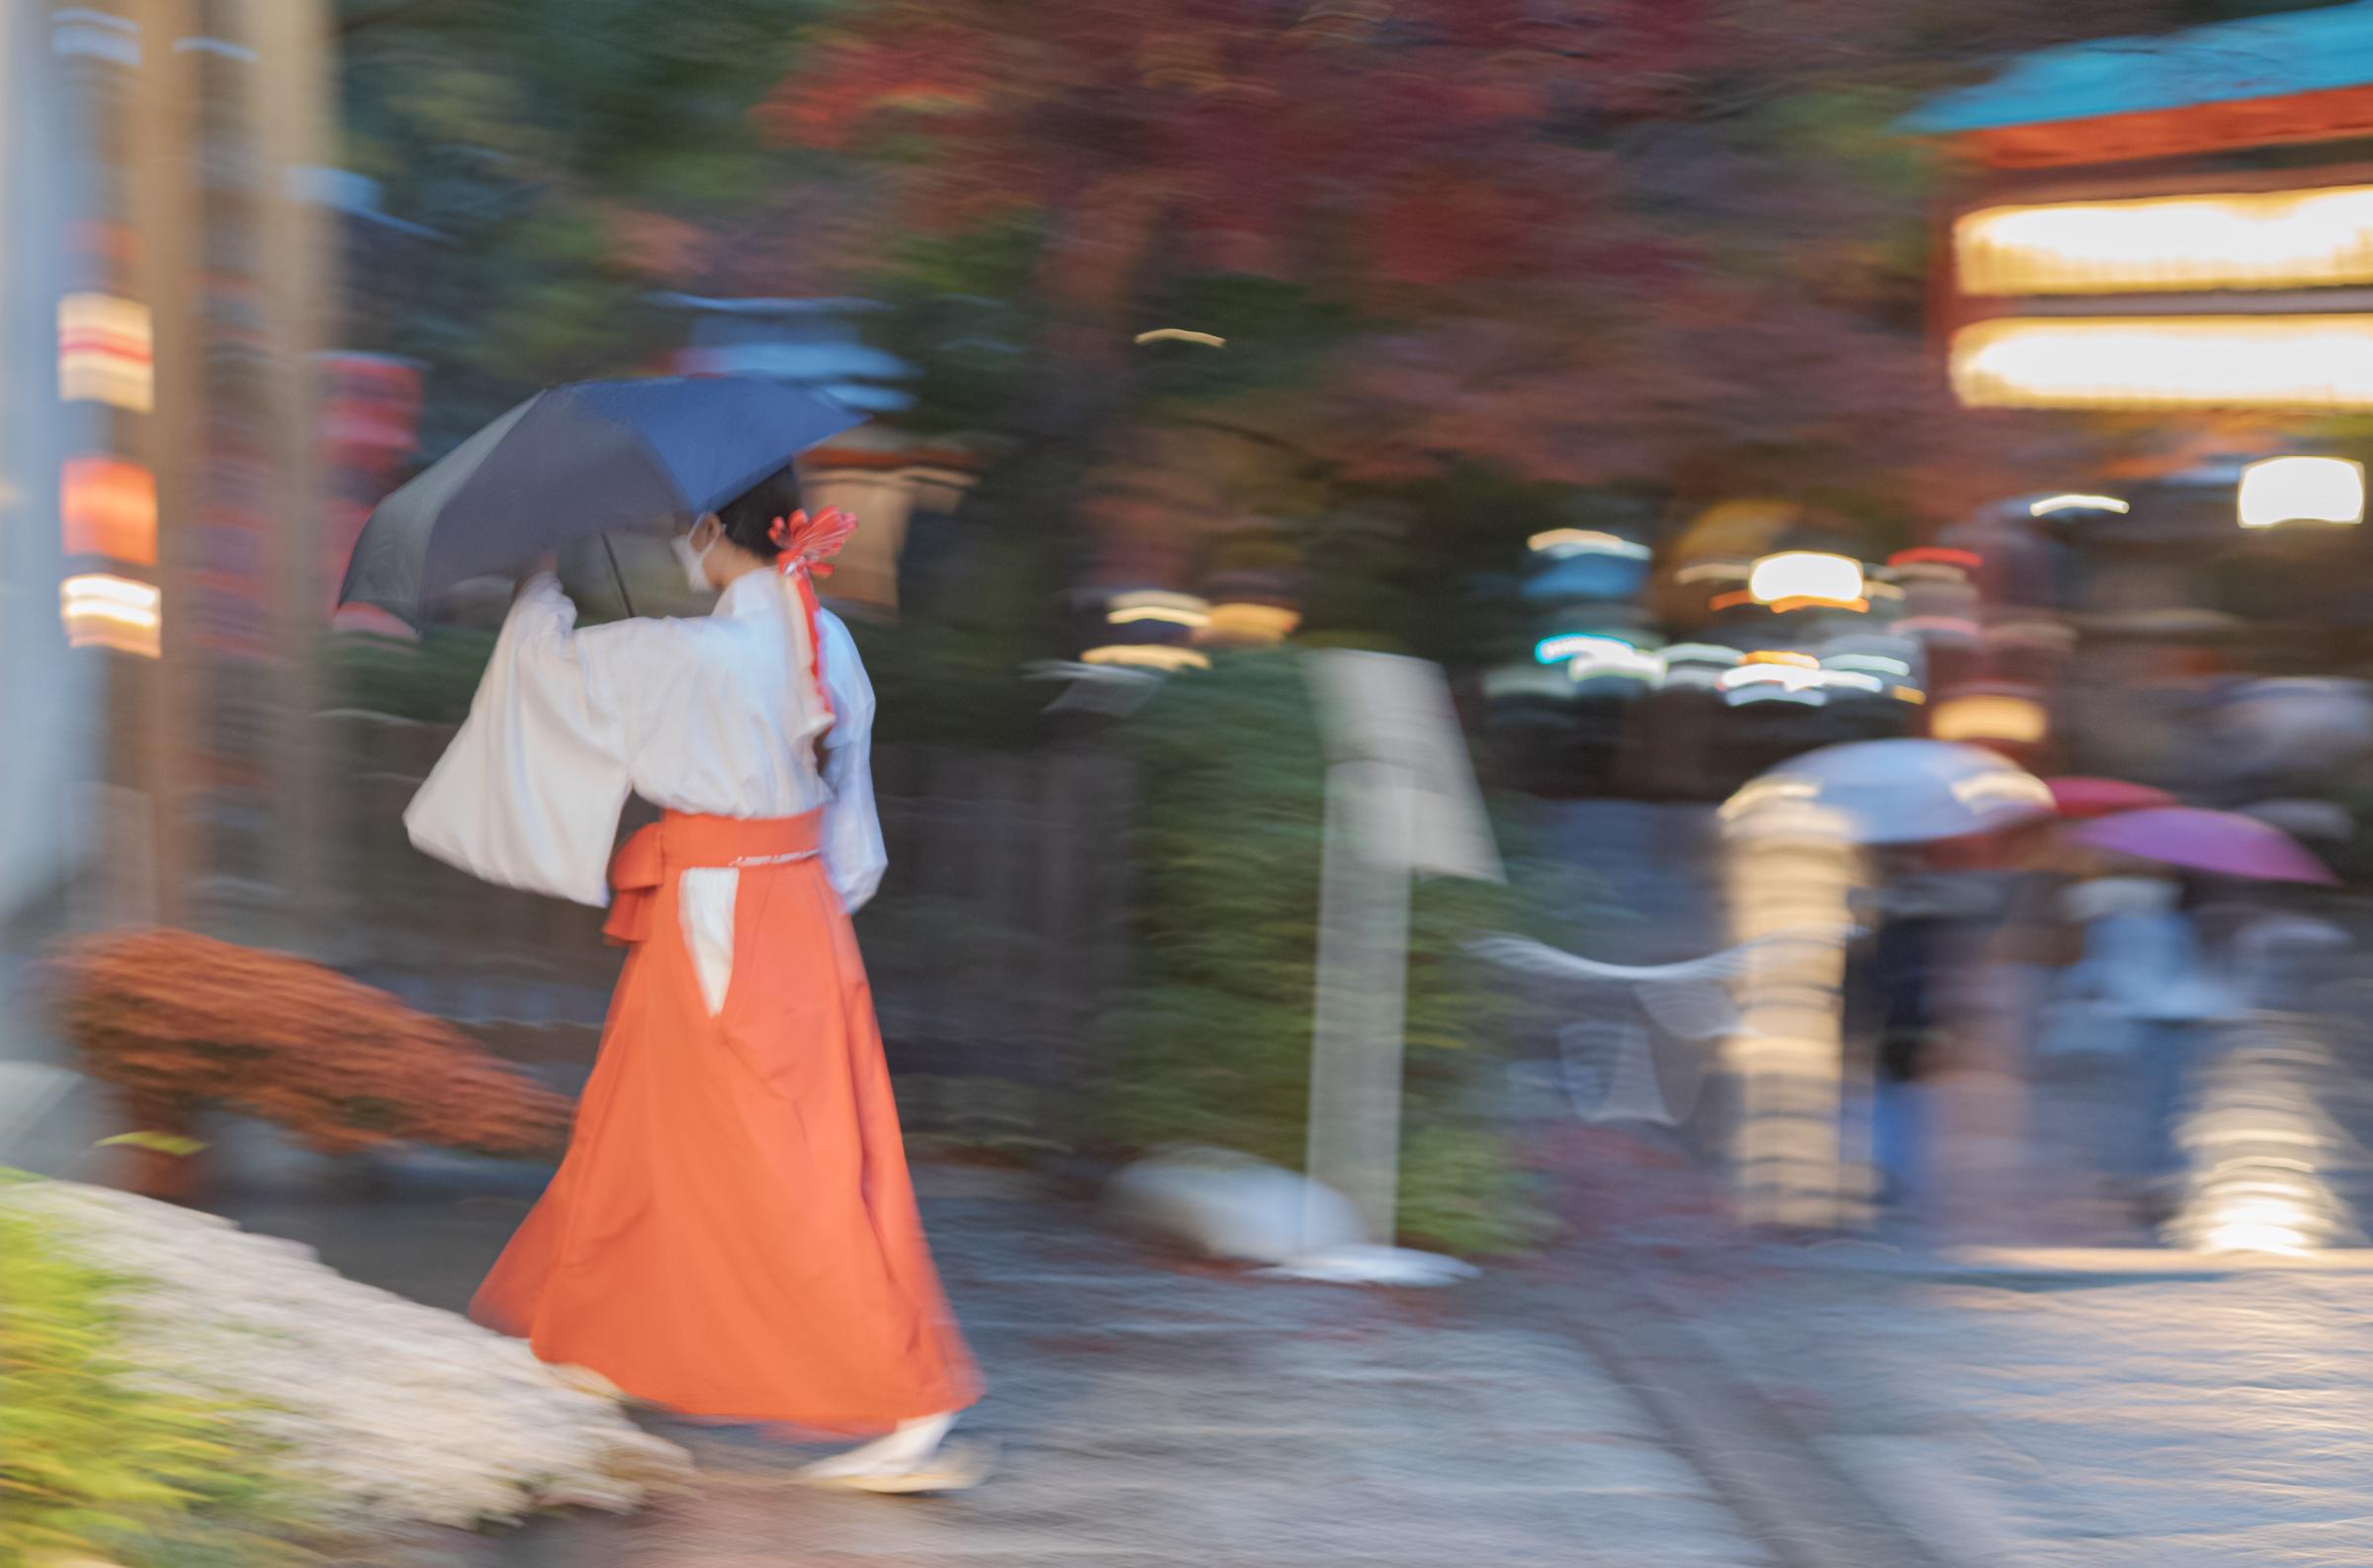 The Beauty of Ephemeral Moments, Kyoto 2022 - Targeted